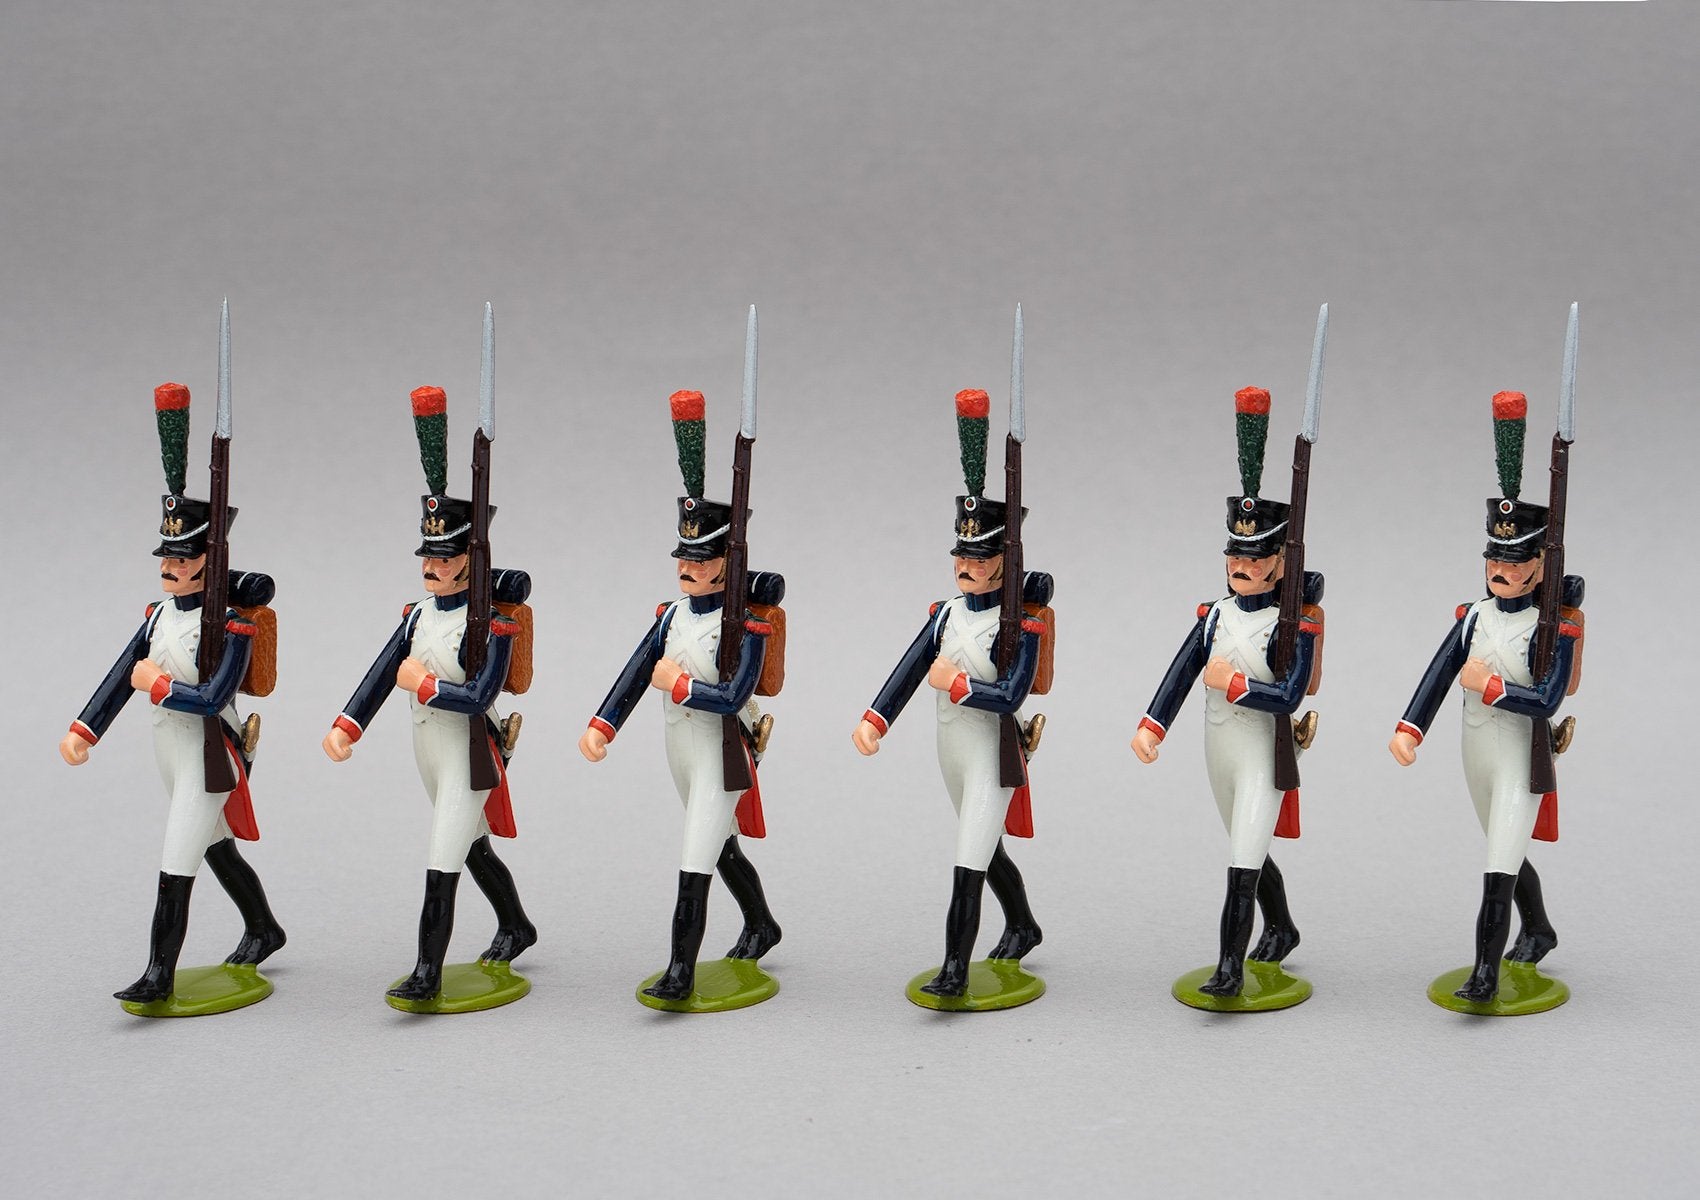 Set 124a Fusiliers-Chasseur | French Infantry | Napoleonic Wars | An elite alternative to the Old Guard.  This set has six men marching at slope arms | Waterloo | © Imperial Productions | Sculpt by David Cowe